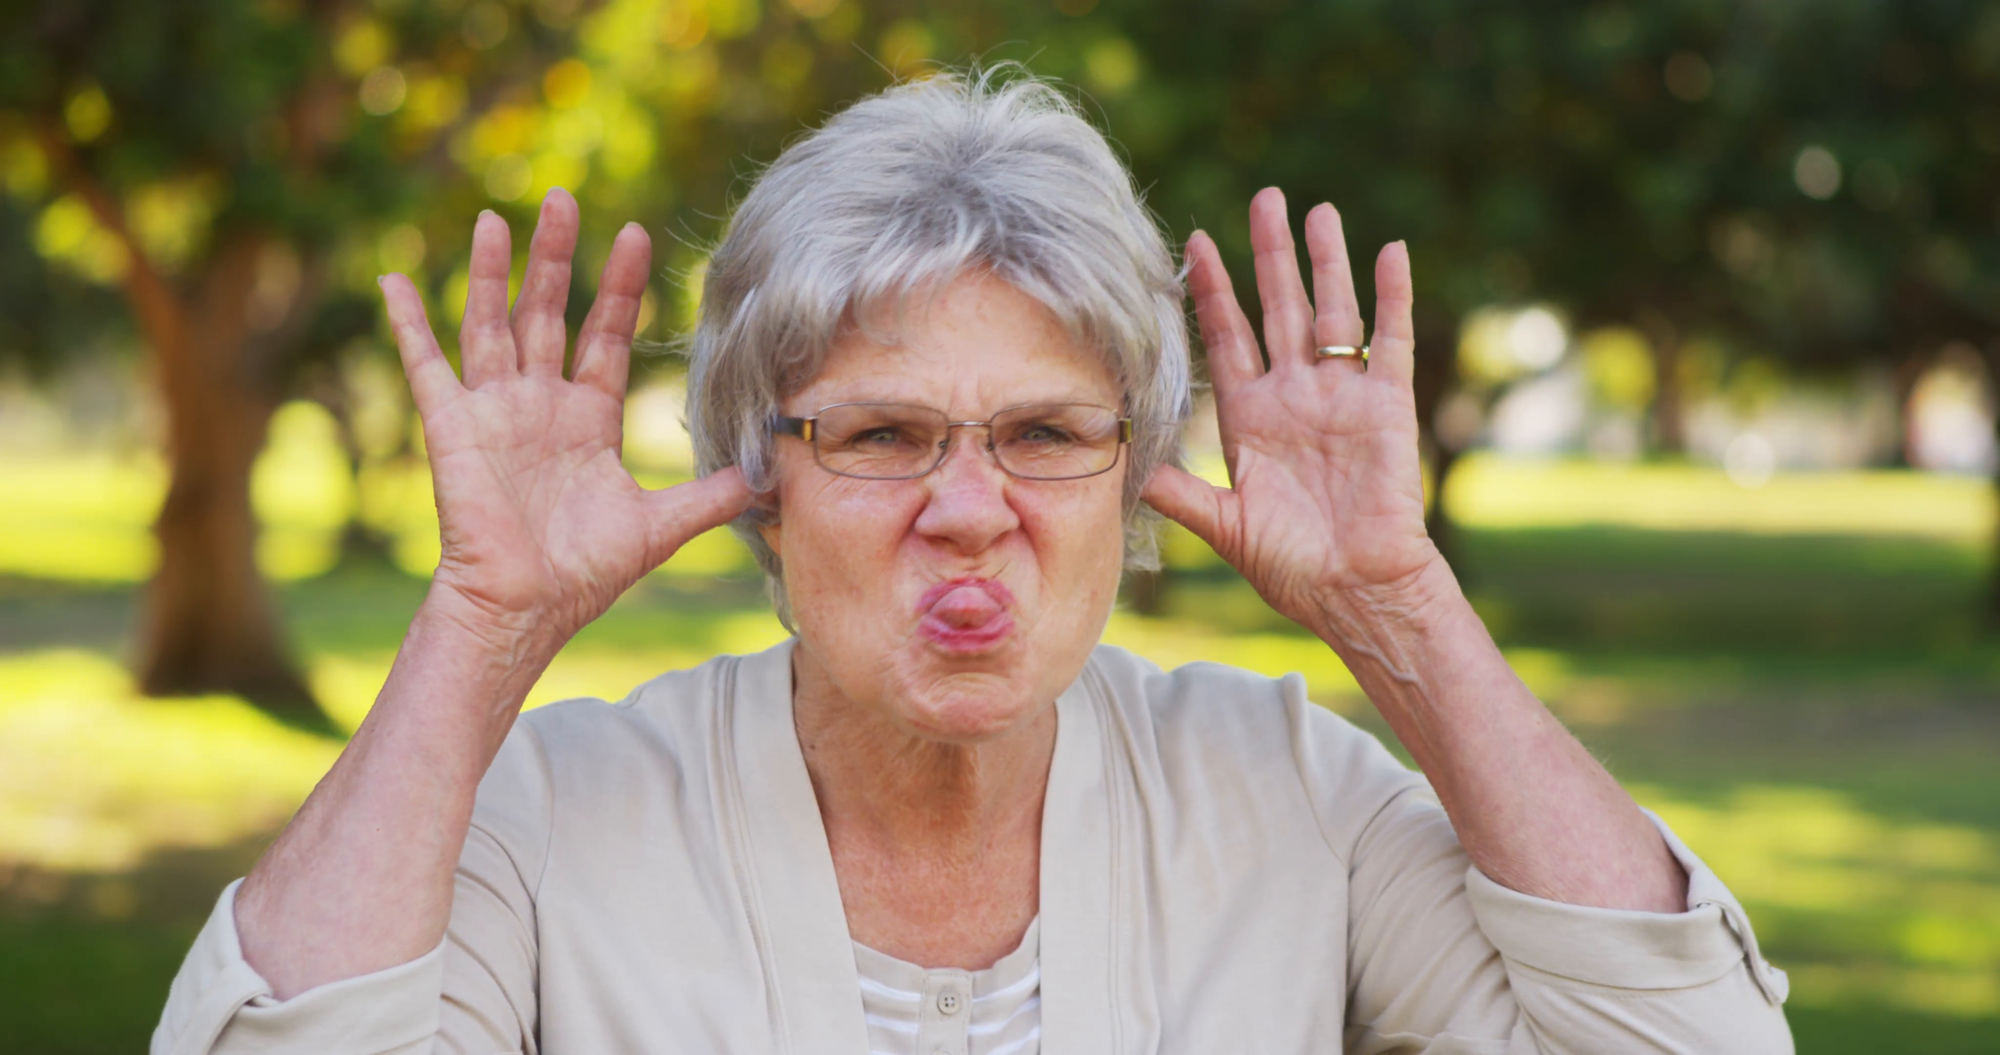 silly-grandma-making-funny-faces-at-the-camera_eybj0uifl__F0000